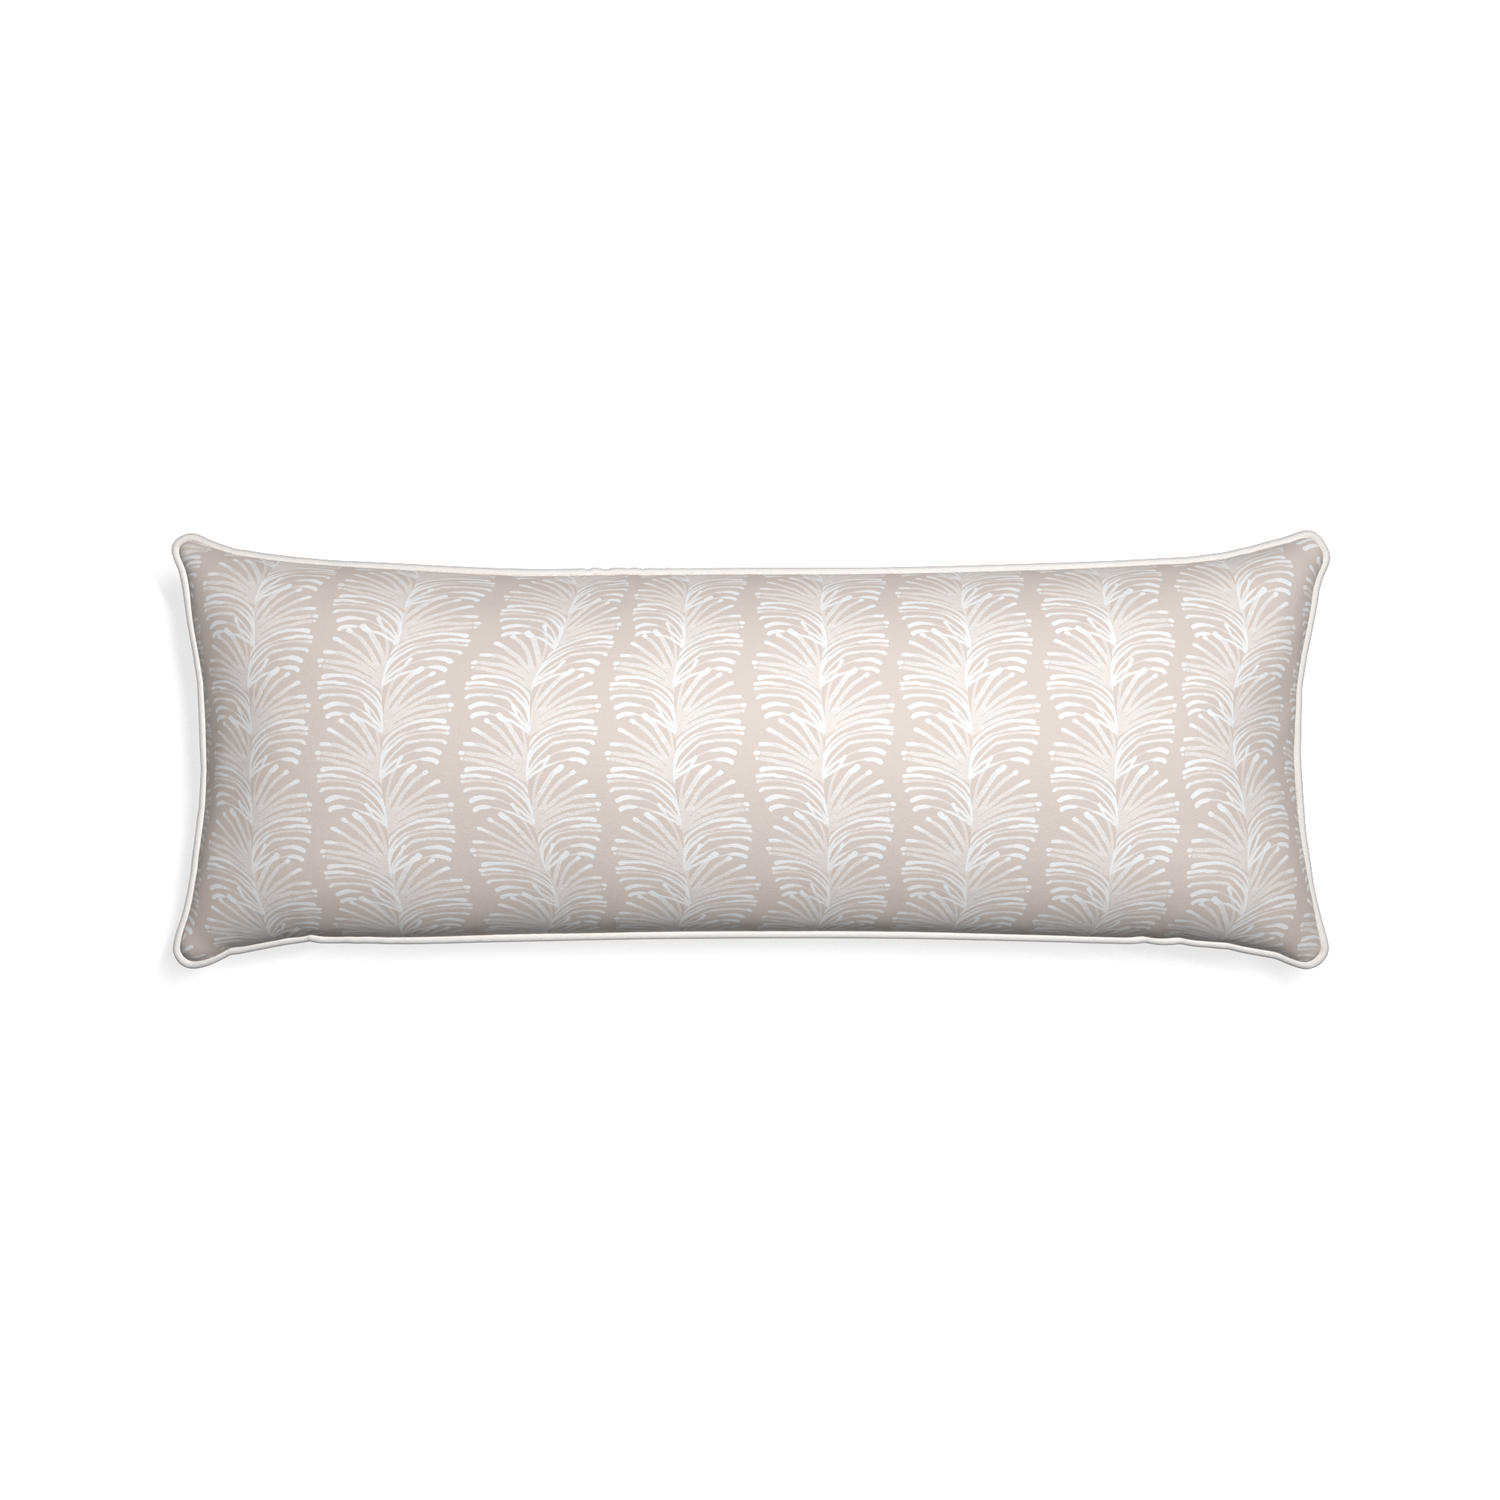 Xl-lumbar emma sand custom pillow with snow piping on white background